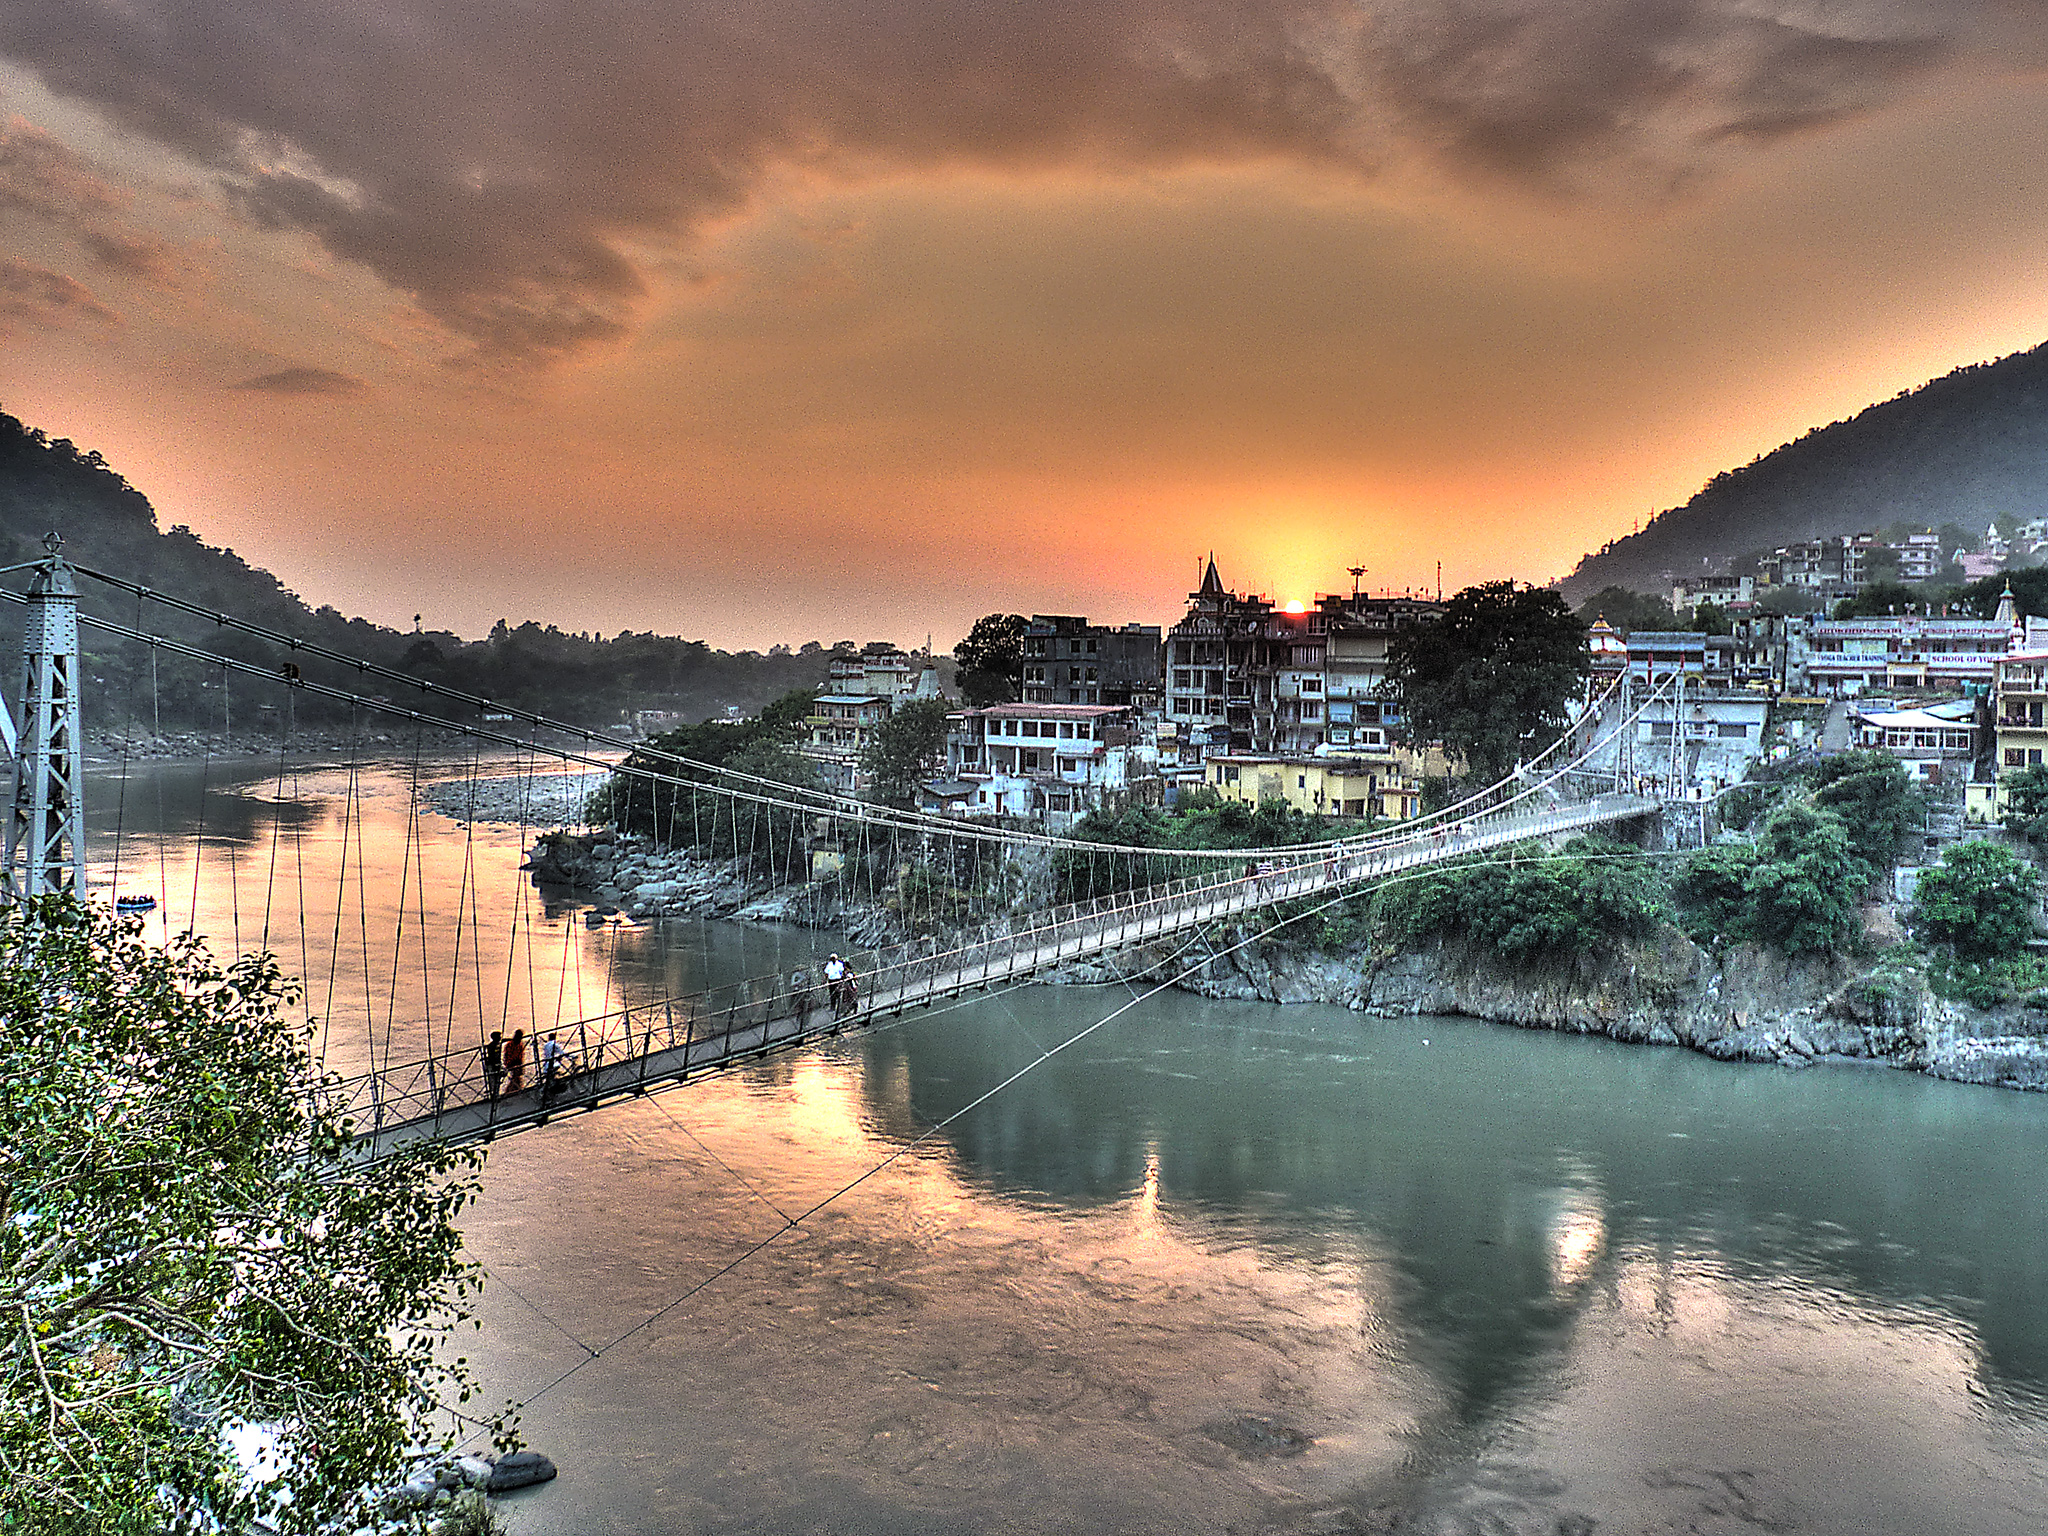 An exciting visit to the Lakshman Jhula of RishikeshÂ Â Â  Â Â Â  Â Â Â 